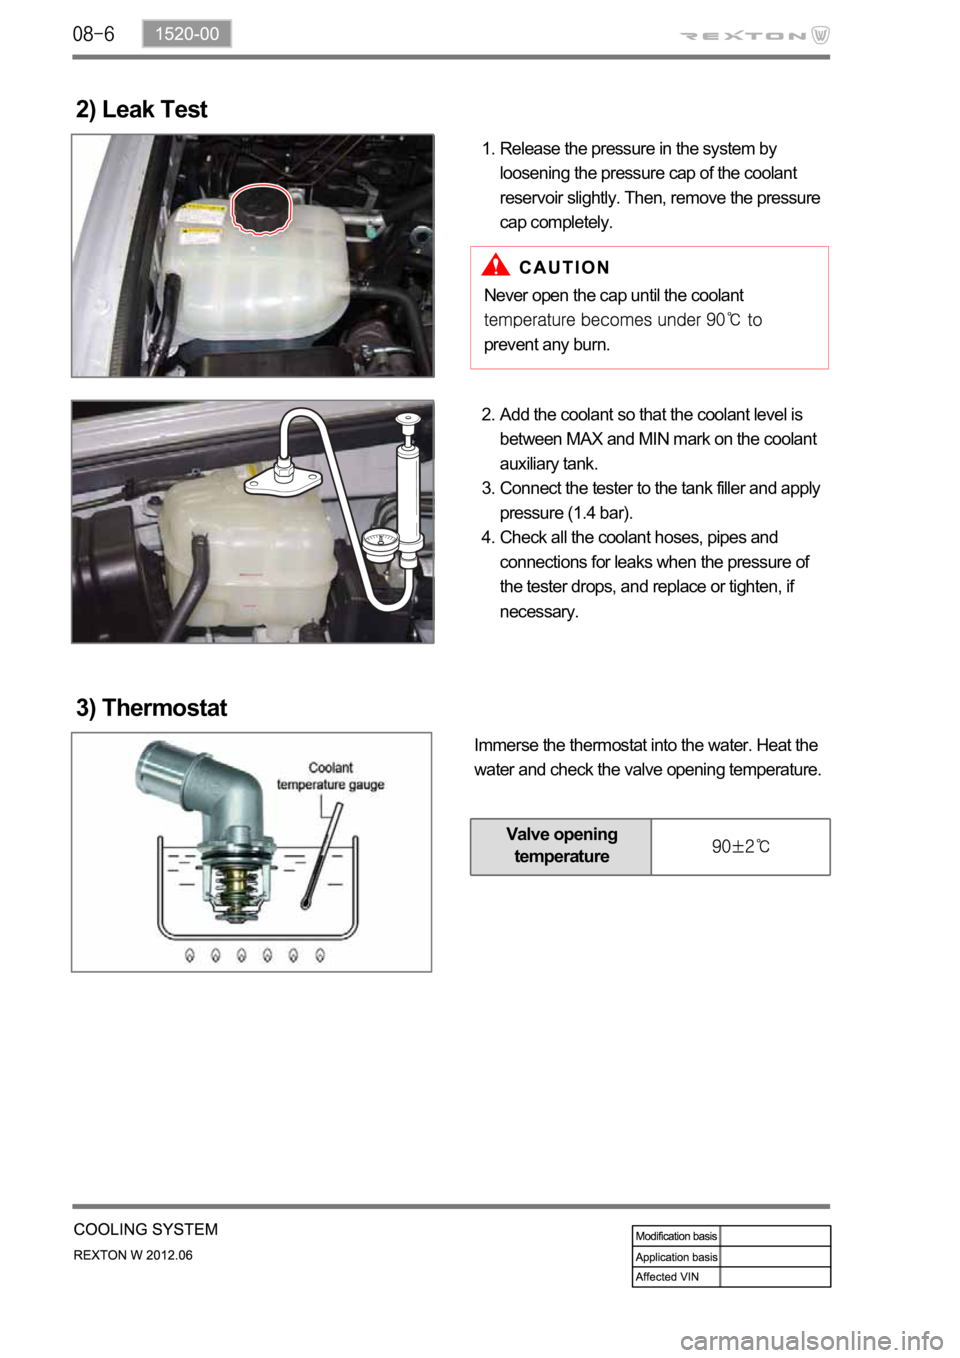 SSANGYONG NEW REXTON 2012  Service Manual 2) Leak Test
Release the pressure in the system by 
loosening the pressure cap of the coolant 
reservoir slightly. Then, remove the pressure 
cap completely. 1.
Never open the cap until the coolant 
p